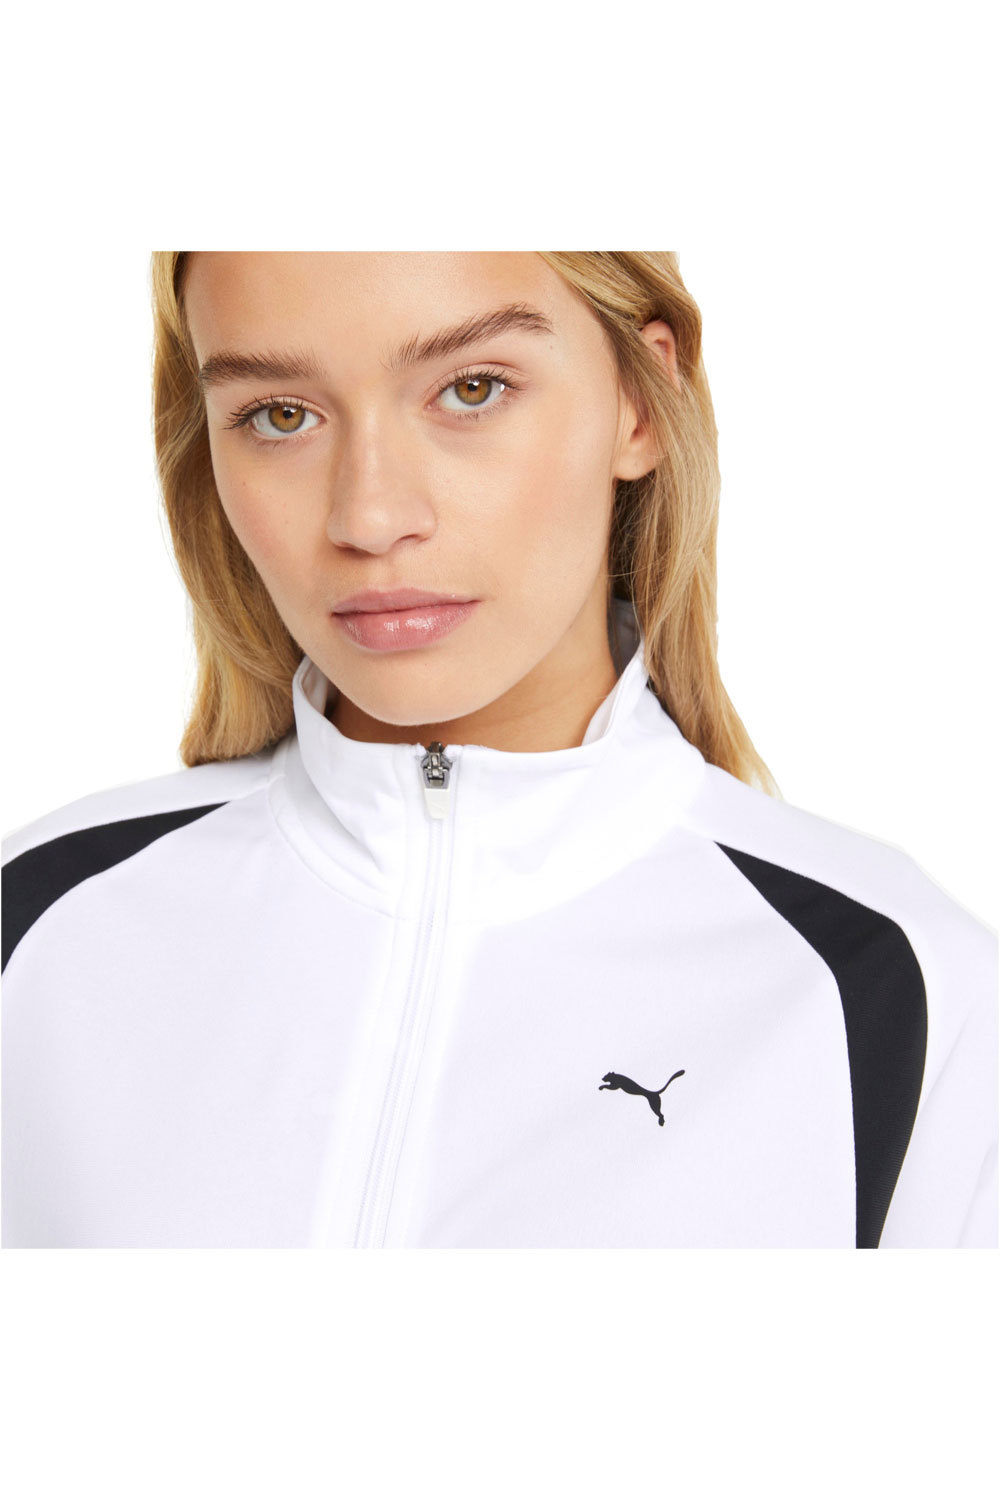 Puma chándal mujer Classic Tricot Suit vista detalle